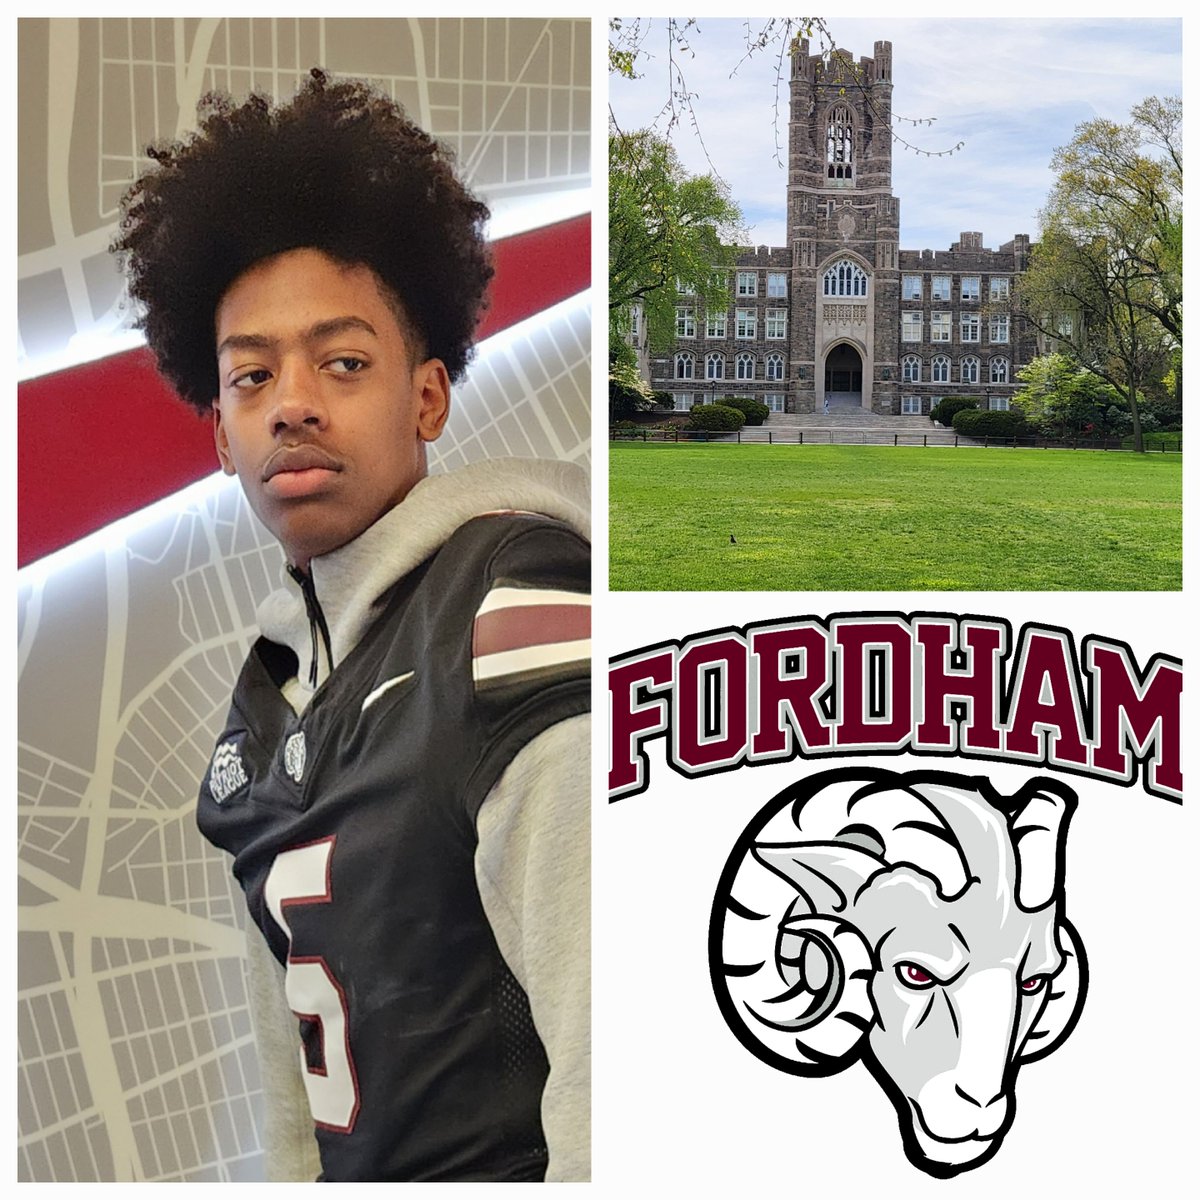 Thank you @FORDHAMFOOTBALL & @CoachLenahan for the Jr.Day invite and information on the academic programs that fordham has to offer and a closer look at your football program @RecruitHTFB @CoachWest5 @WRCoachVannucci @Coach_DiRi @Coach_Conlin @EricOfficialDMV